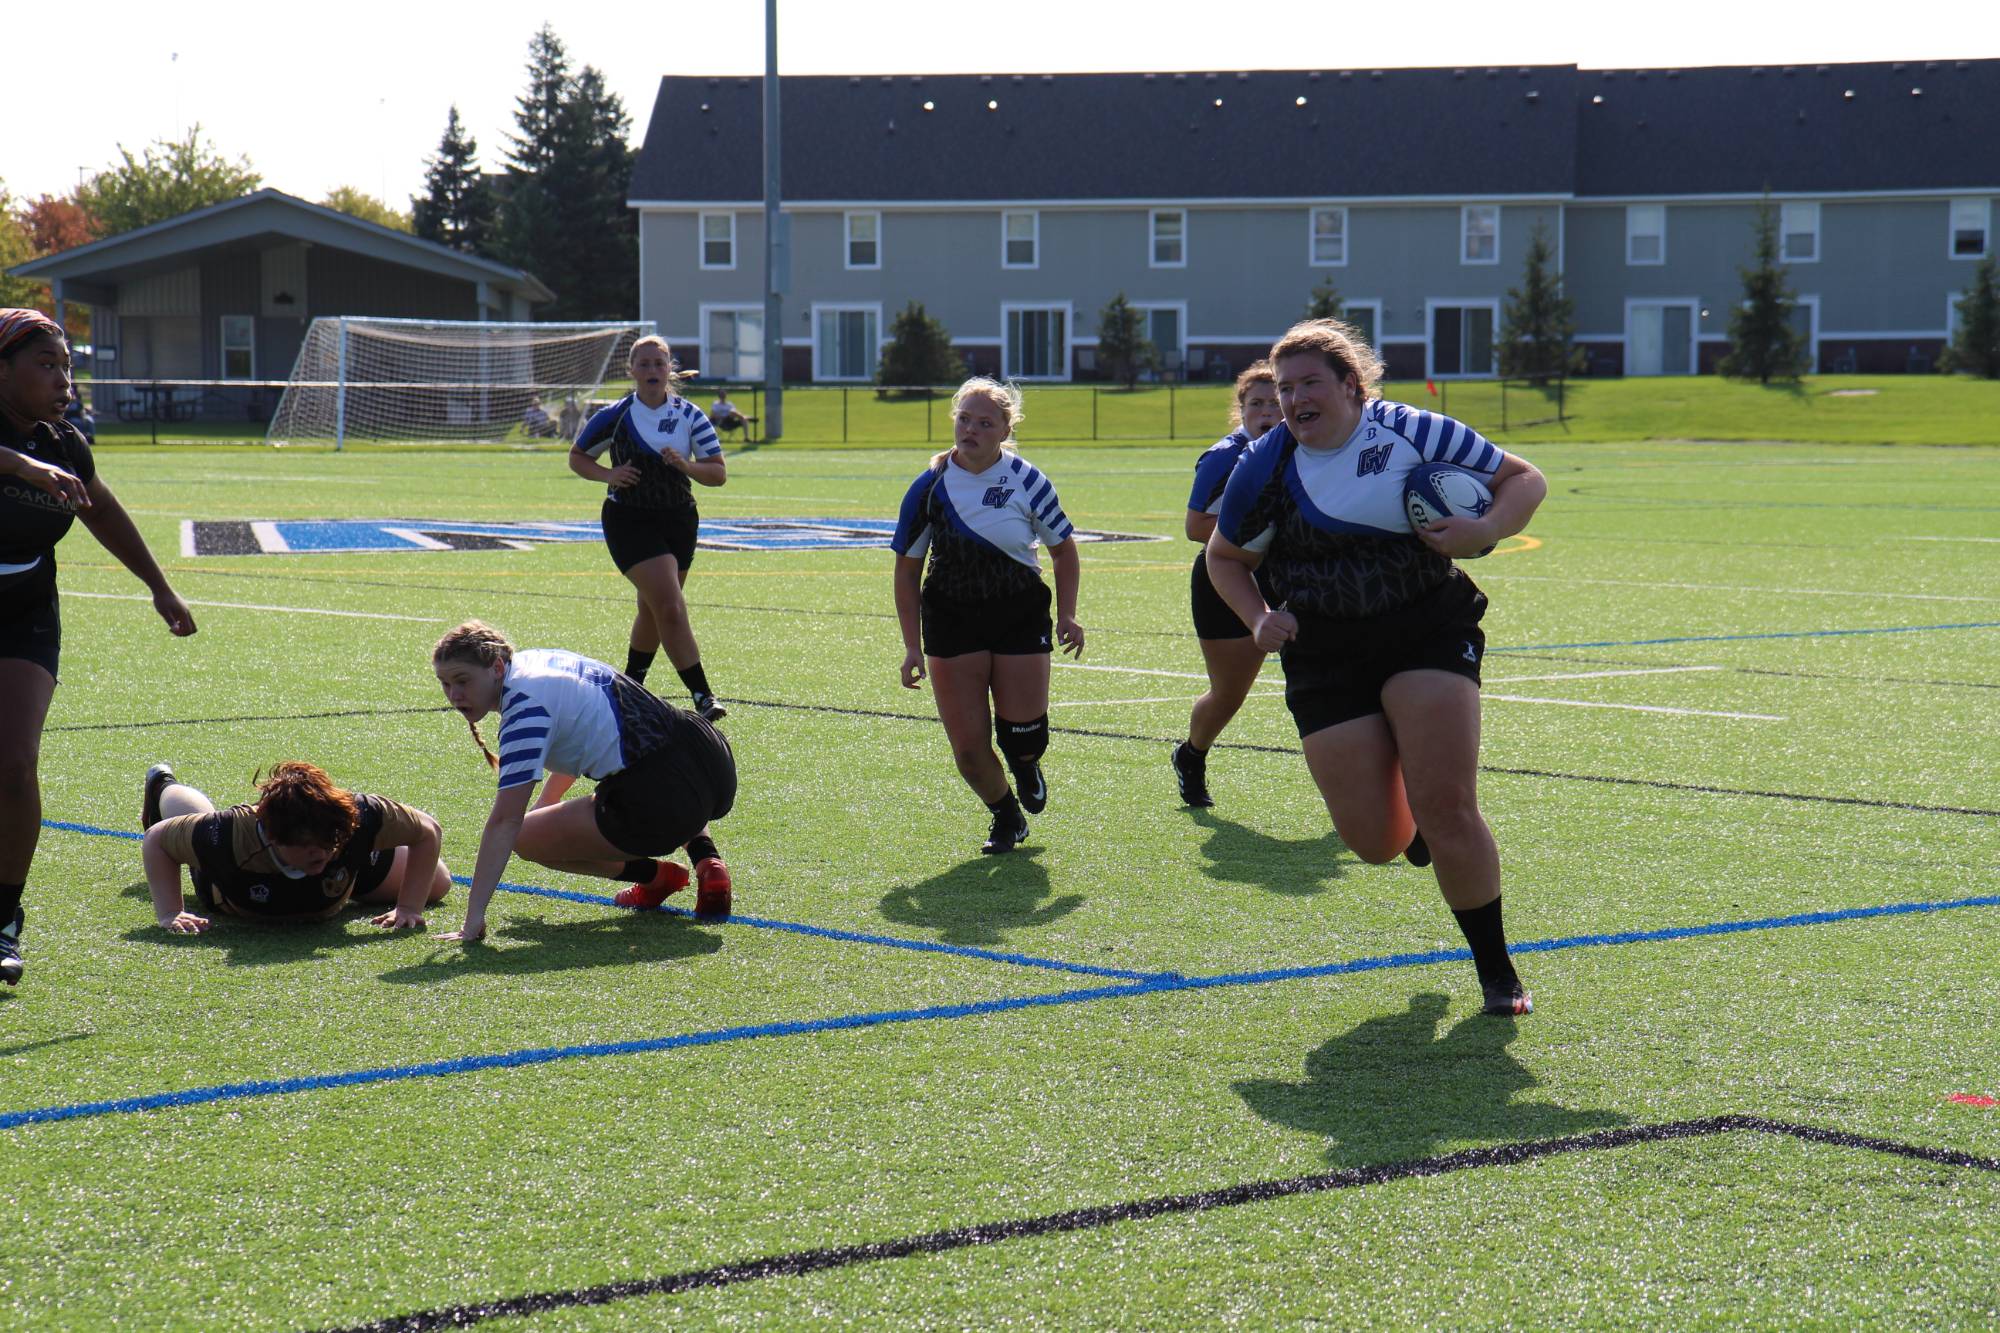 women's rugby game on field 1